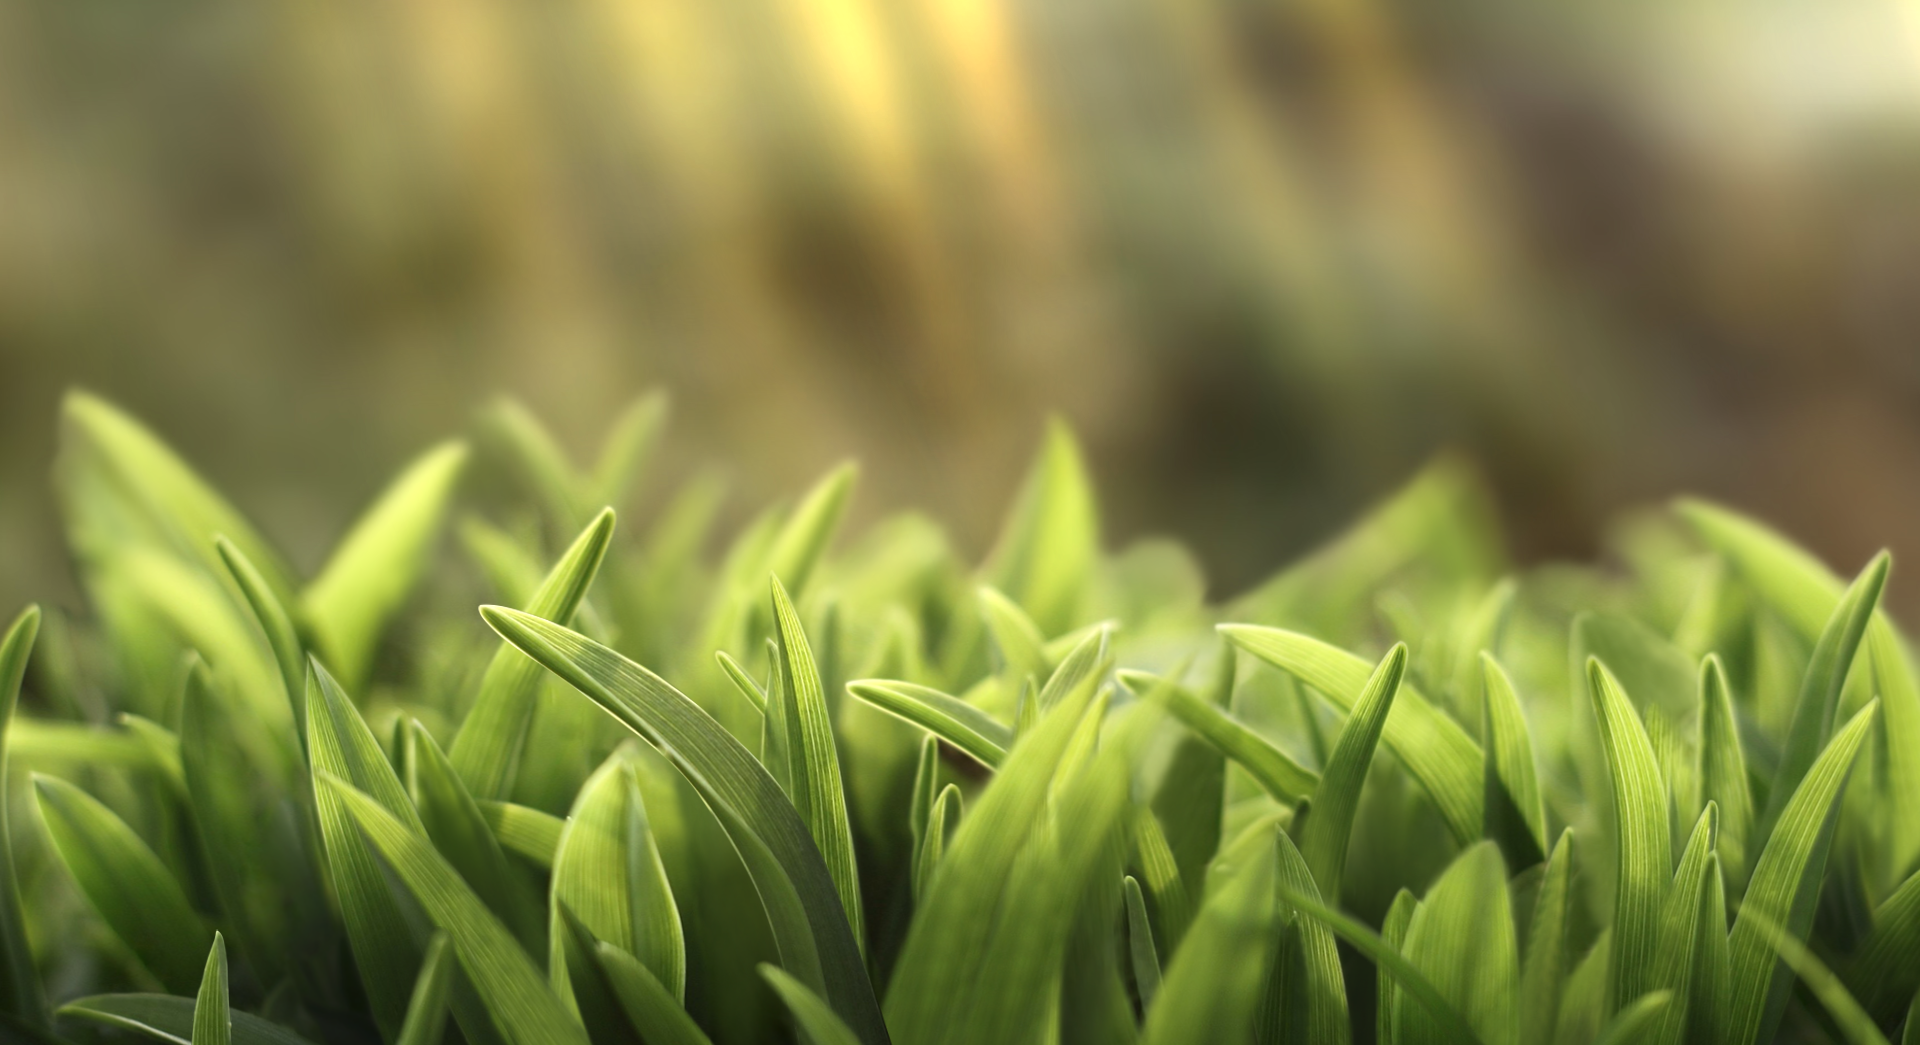 Green grass eye protection live wallpaper [DOWNLOAD FREE]